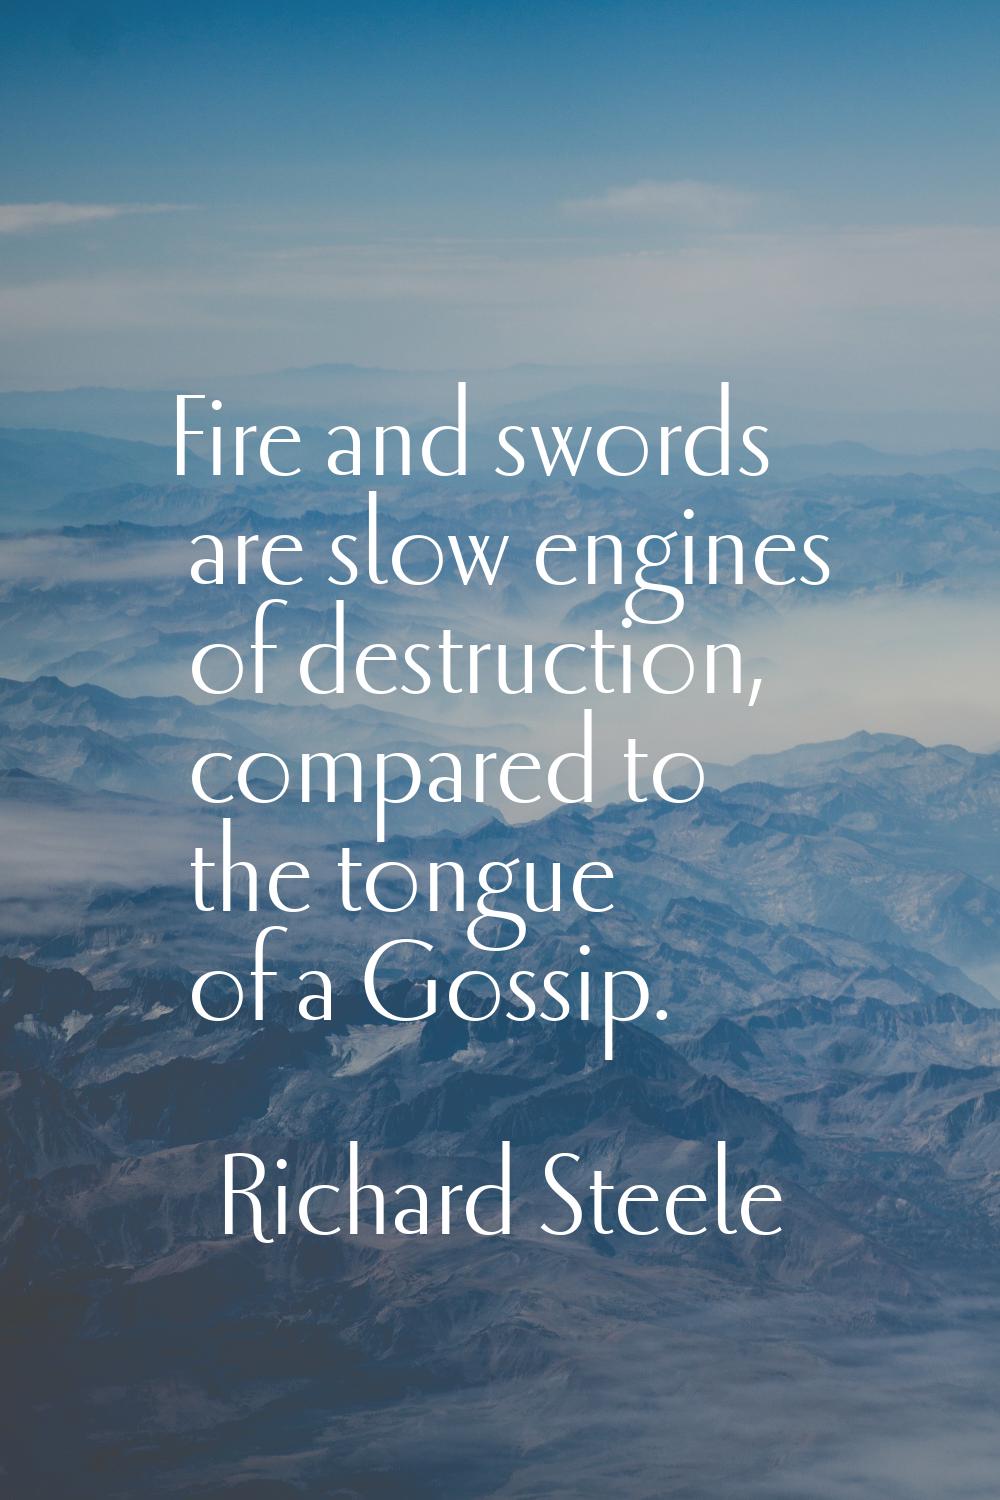 Fire and swords are slow engines of destruction, compared to the tongue of a Gossip.